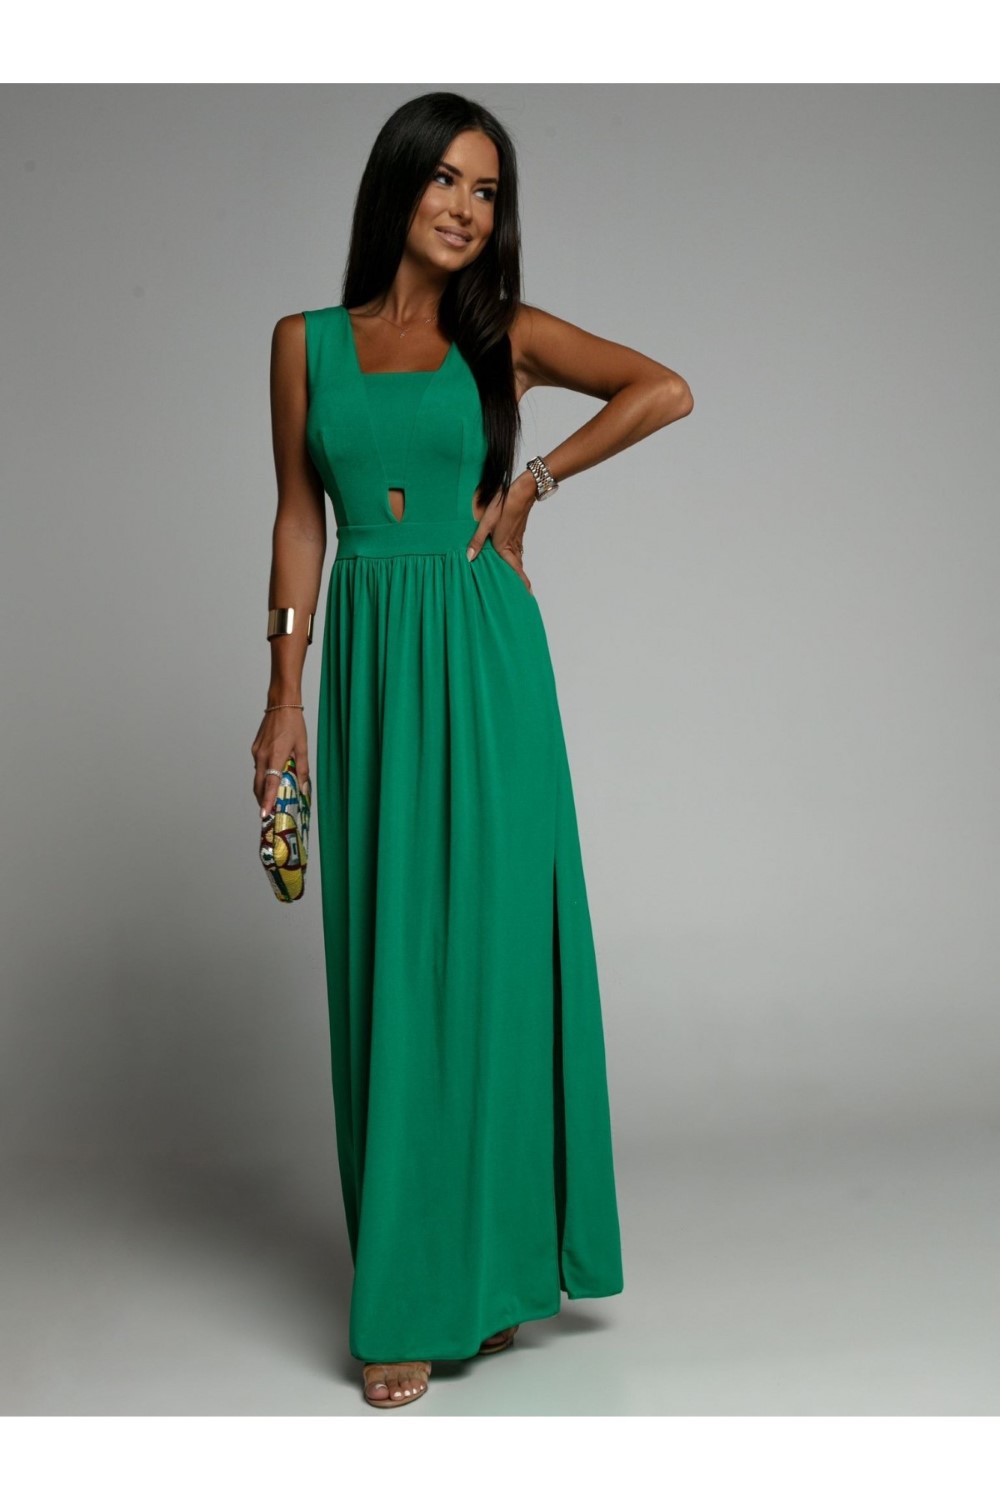 Green maxi dress with cut-outs